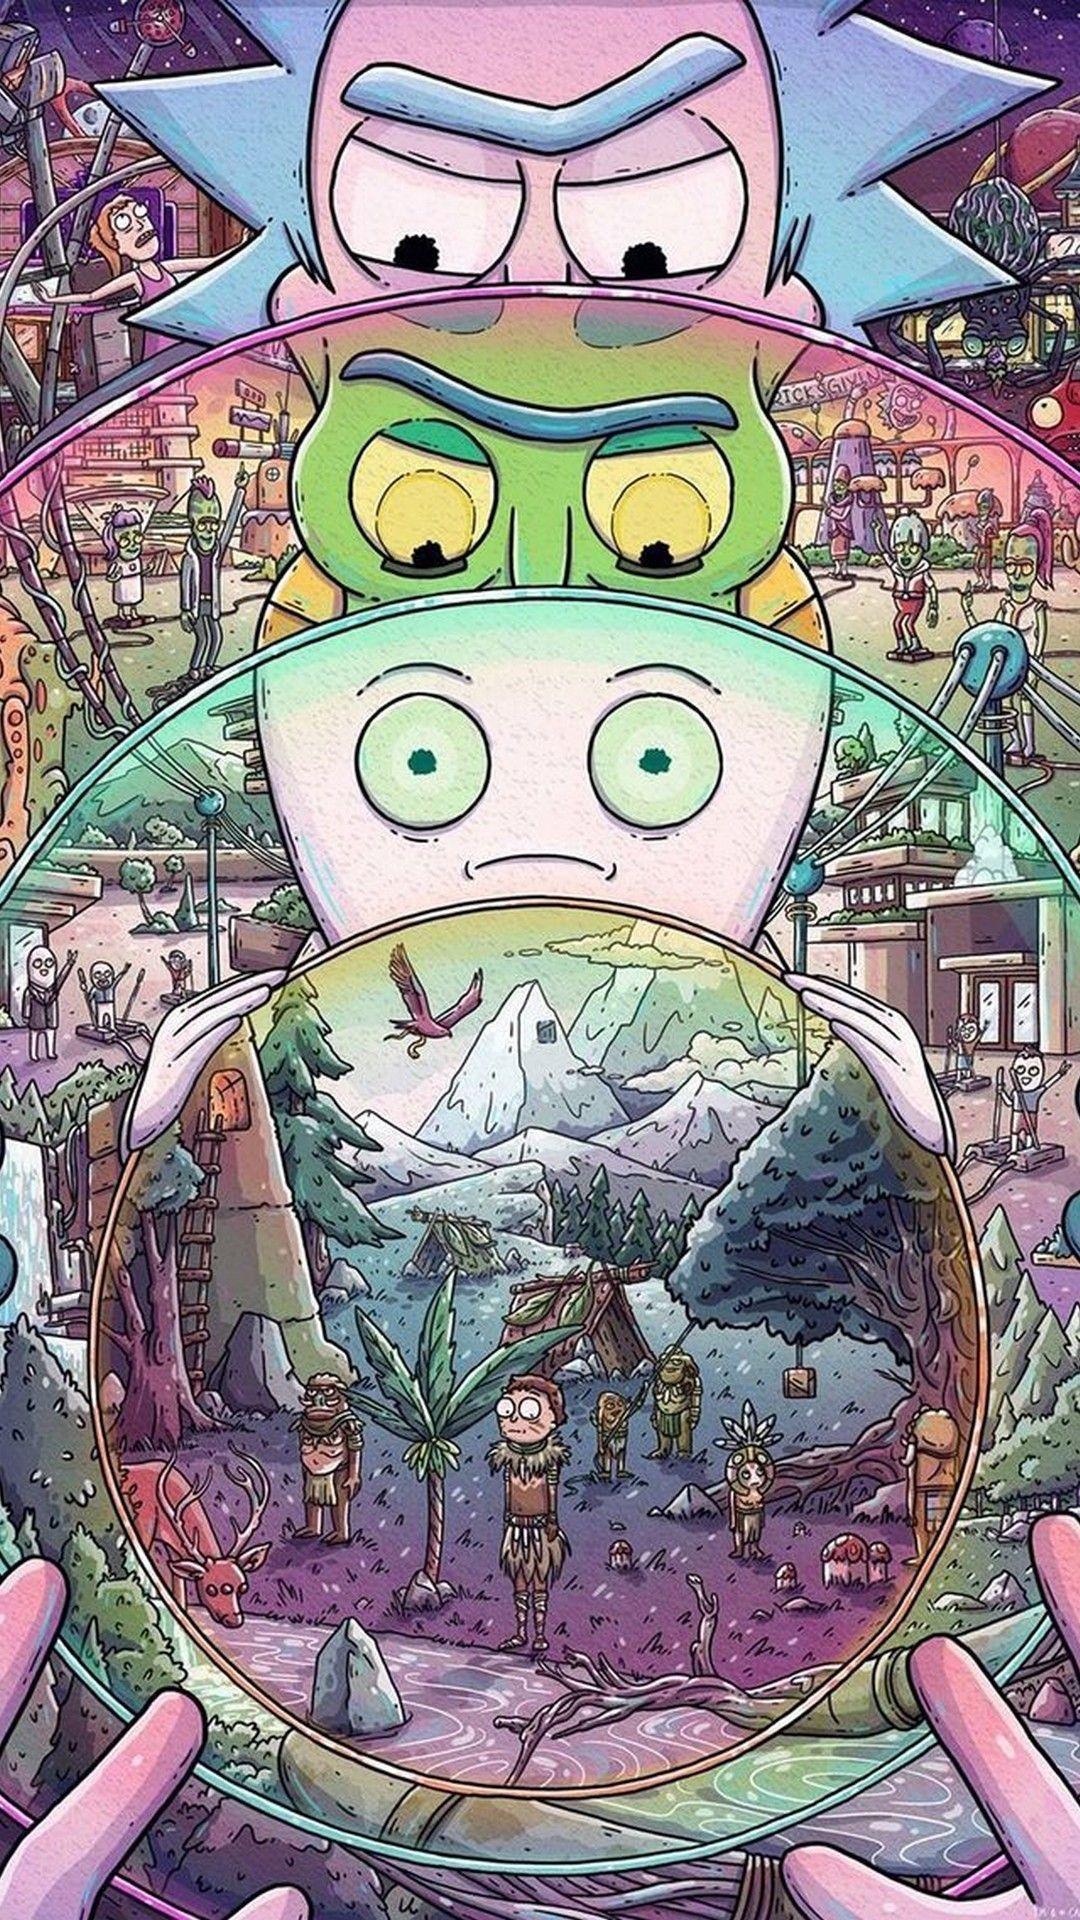 Awesome Rick and Morty Wallpaper Free Awesome Rick and Morty Background